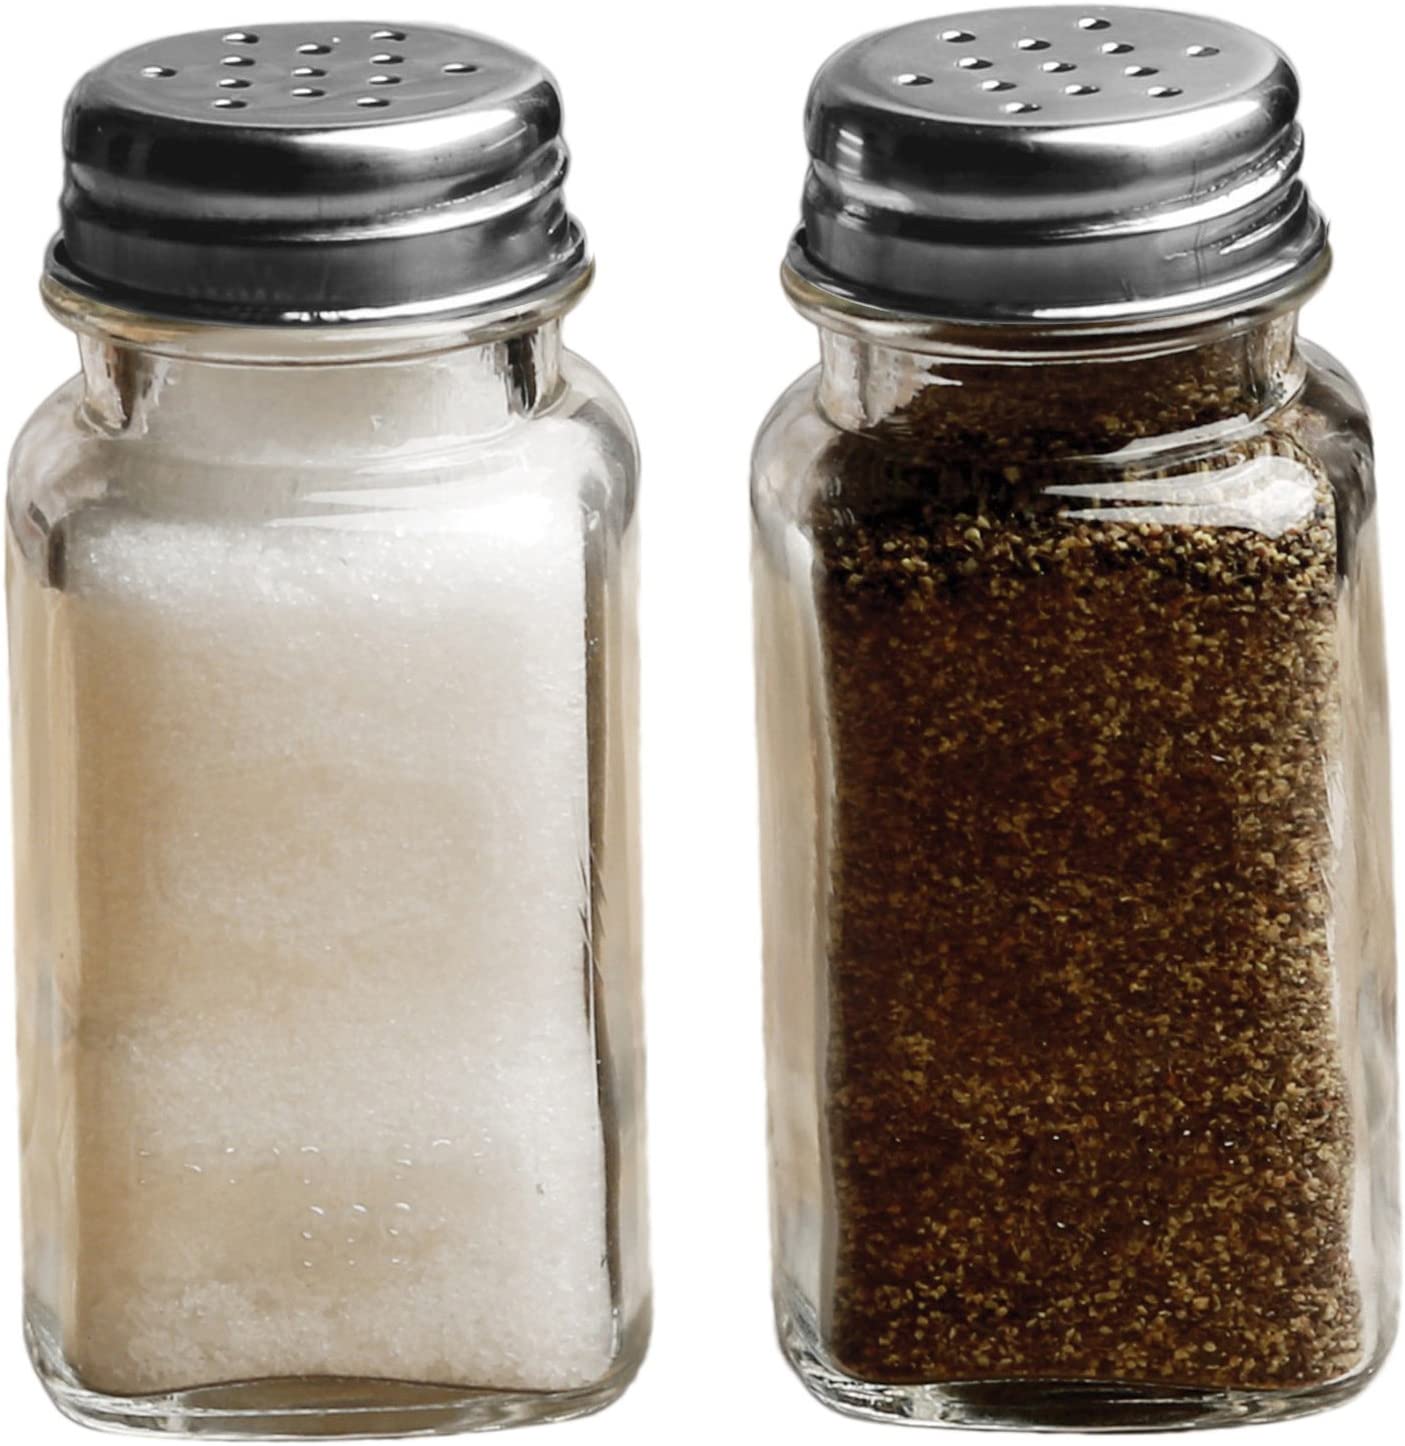 Circleware Yorkshire Glass Salt and Pepper Shakers, Set of 2, 2.85 oz, Clear